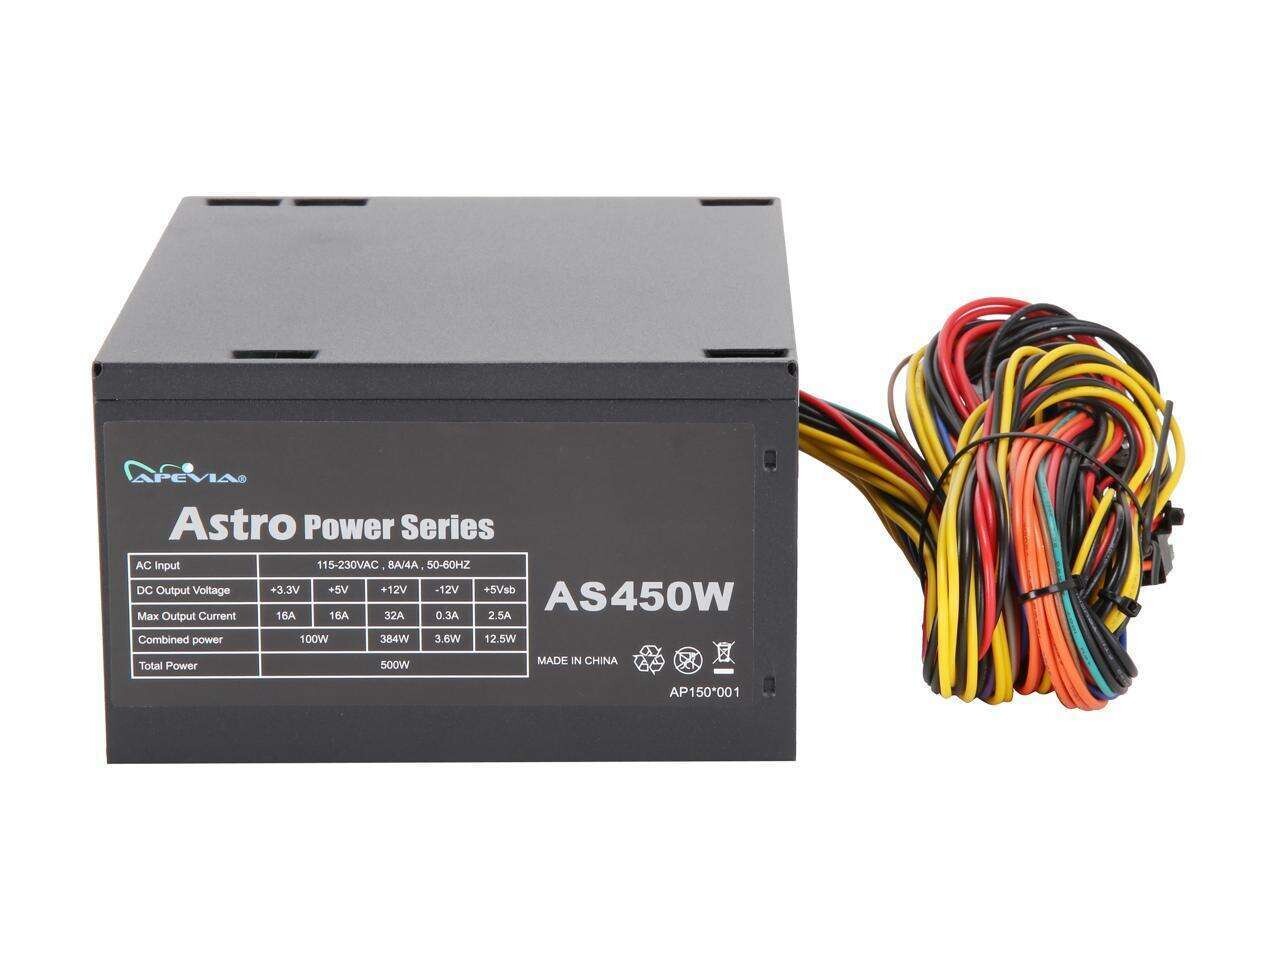 APEVIA ATX-AS450W Astro 450W ATX Power Supply with Auto-Thermally Controlled 120mm Fan